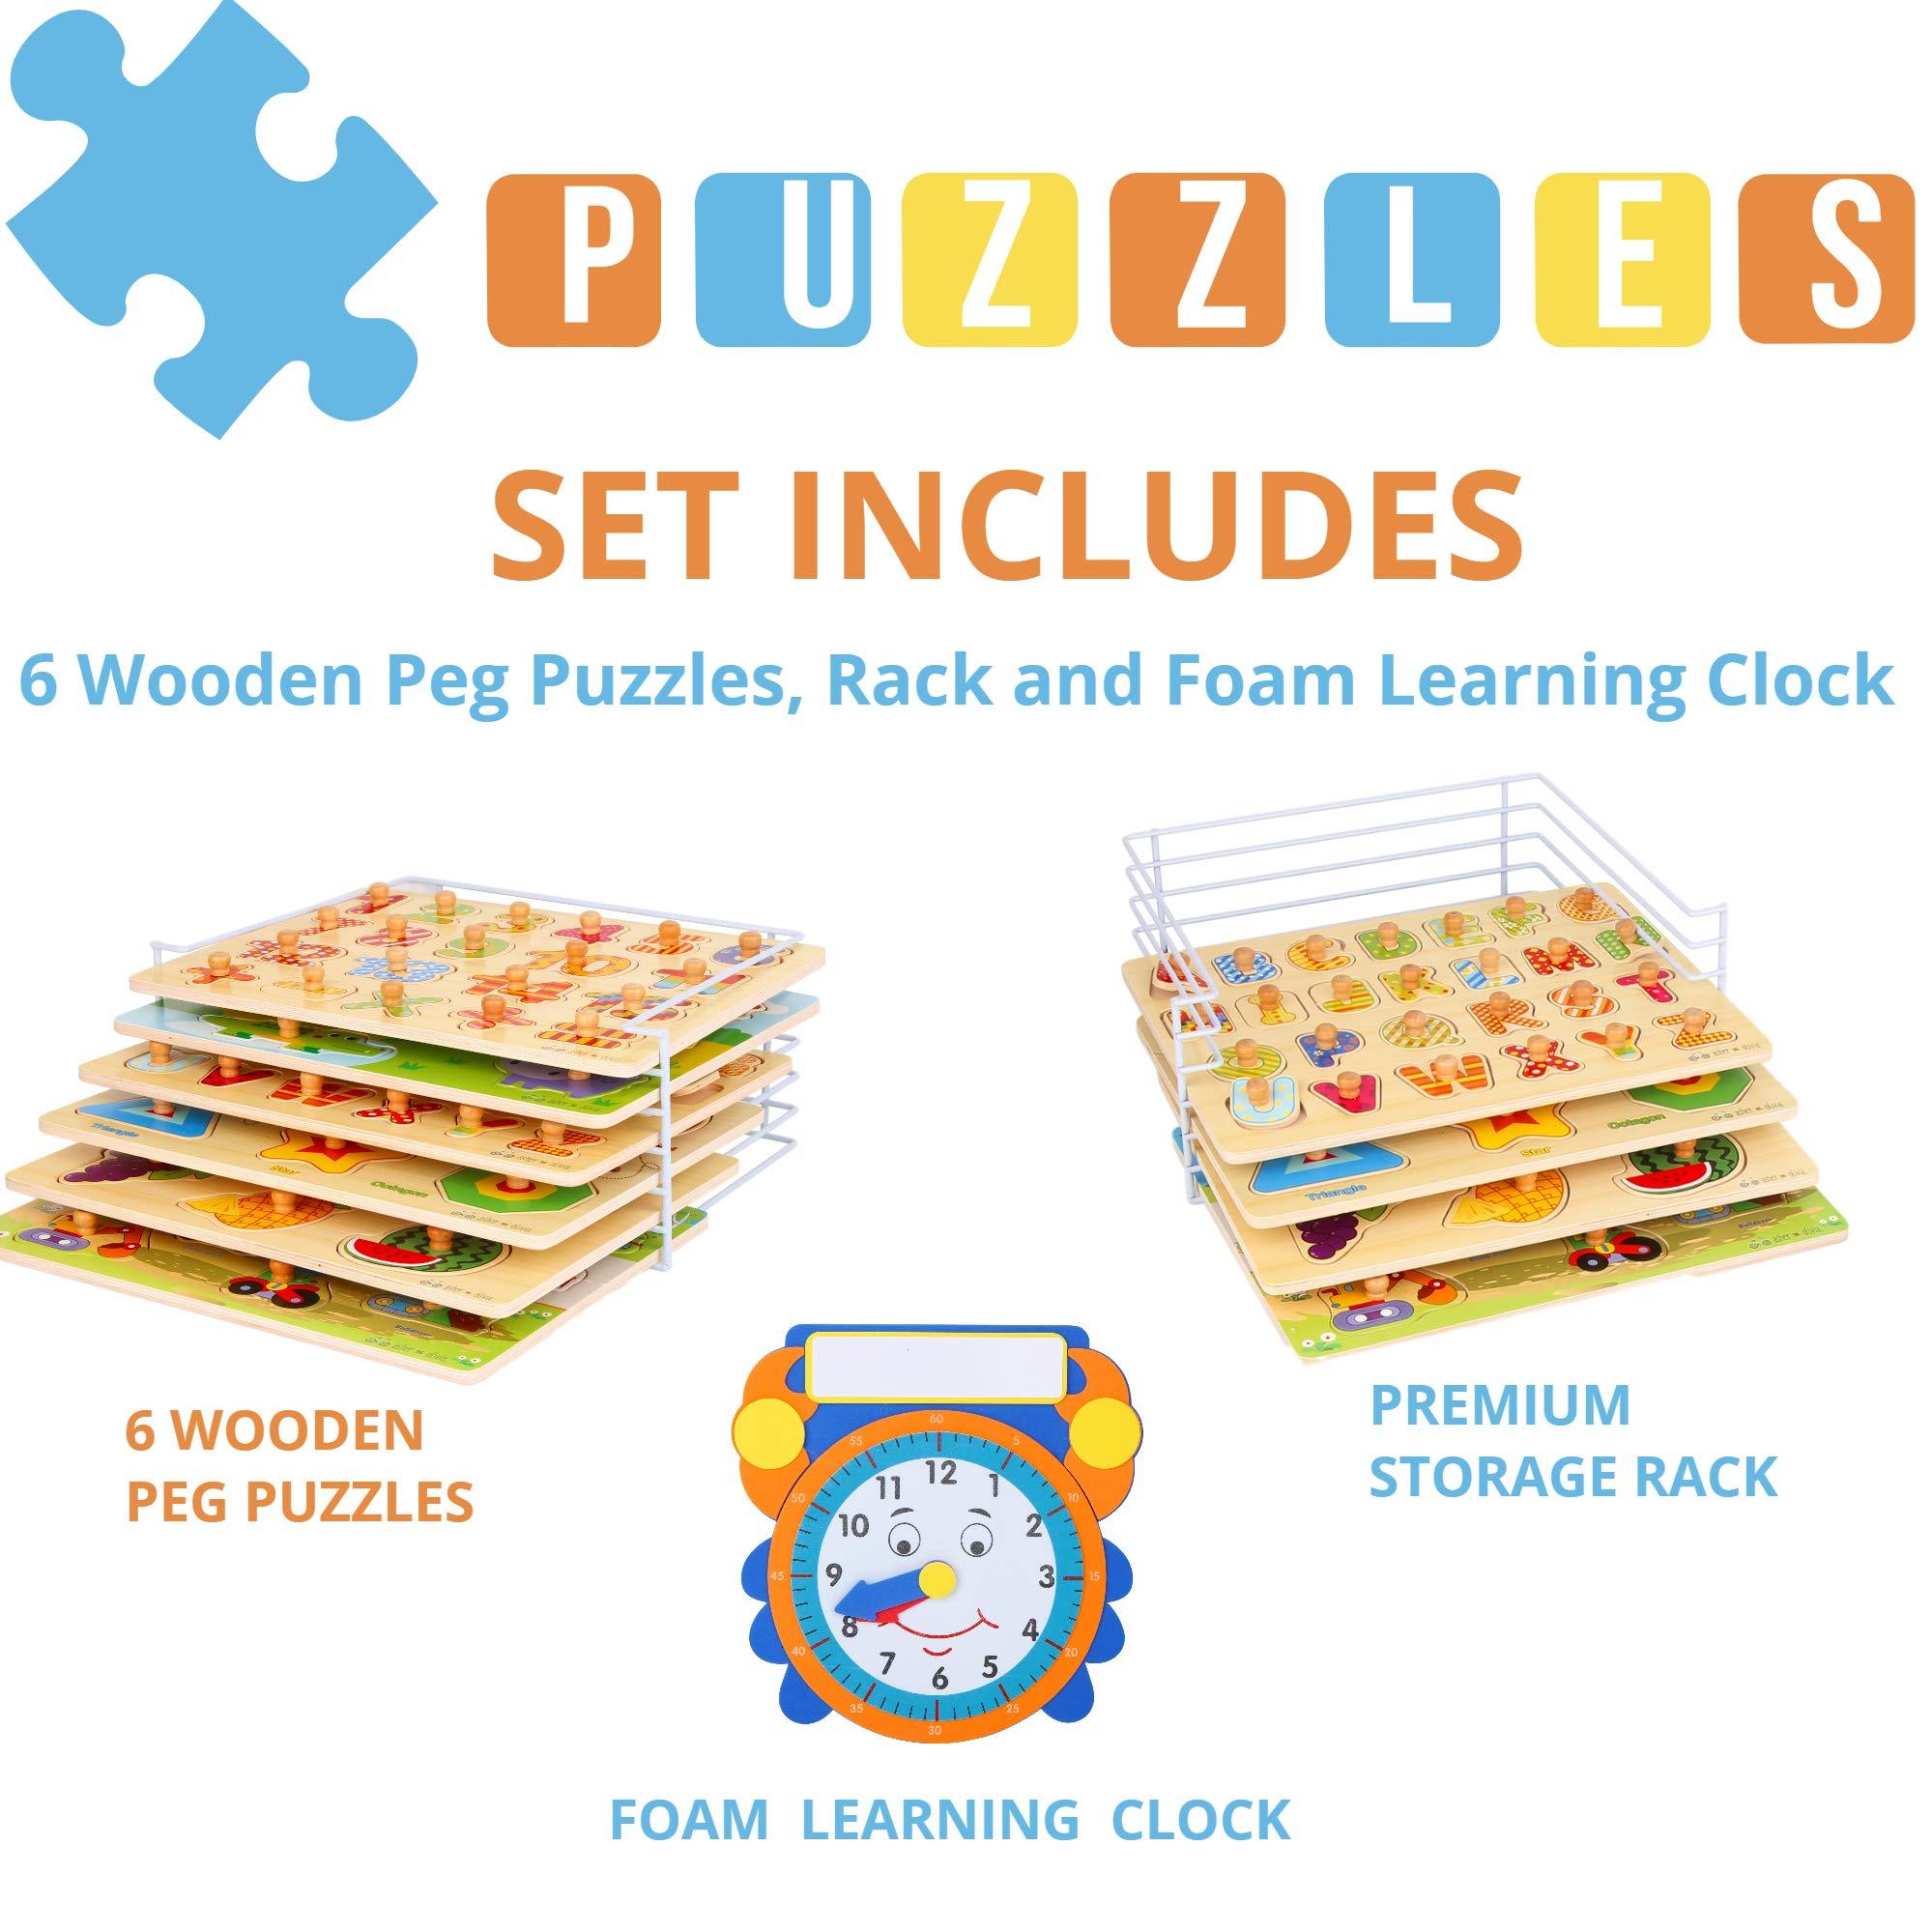 Wooden Puzzles for Toddlers 1-3, 6 Pack Peg Puzzles with Wire Puzzle Holder  Rack for Kids, Learning …See more Wooden Puzzles for Toddlers 1-3, 6 Pack